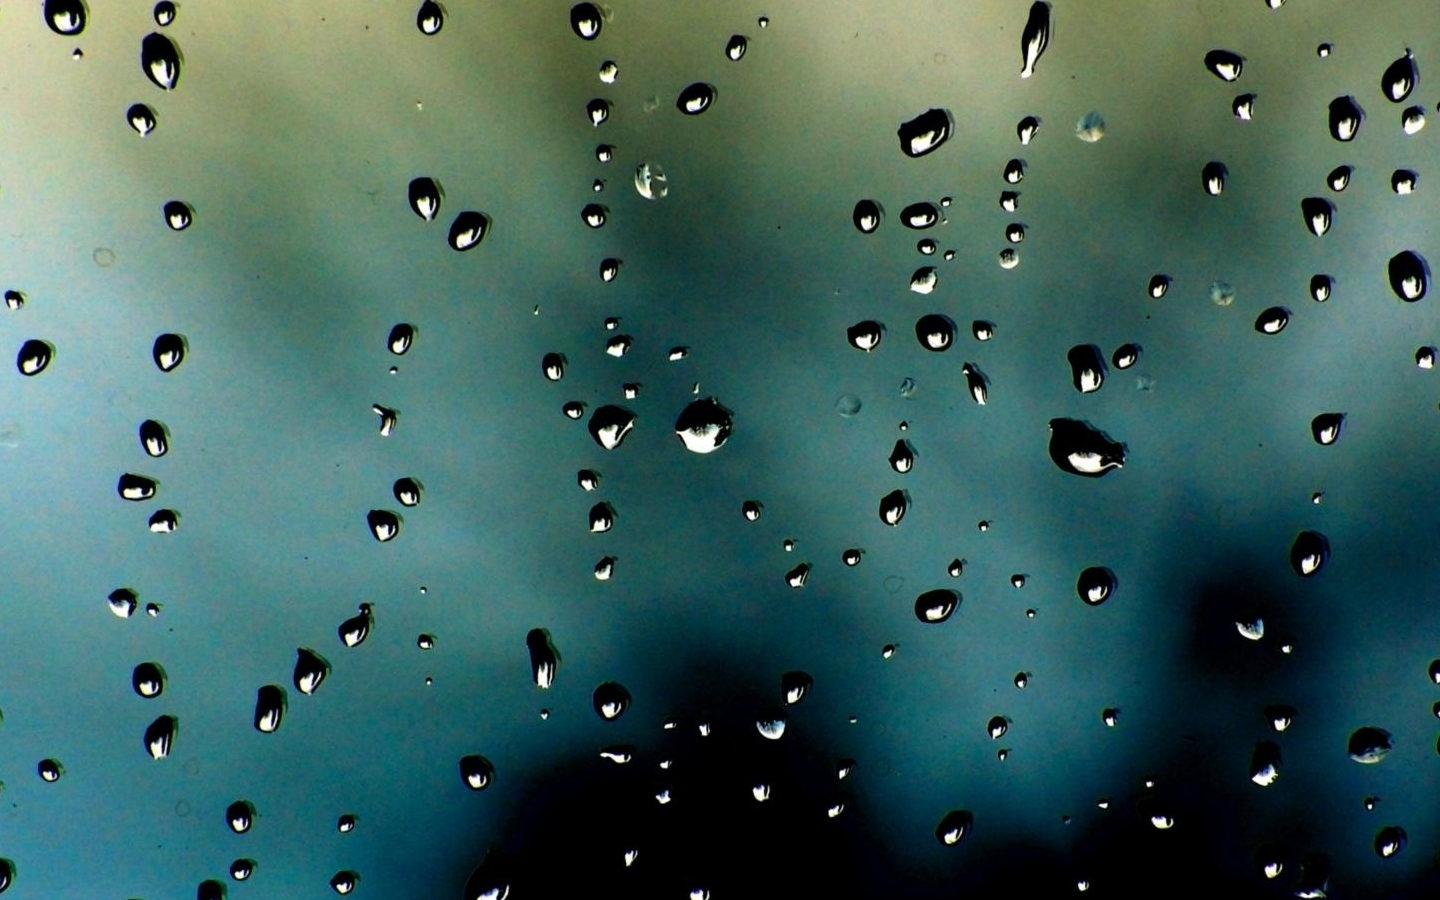 Drops On The Glass Mac Wallpaper Download | Free Mac Wallpapers ...